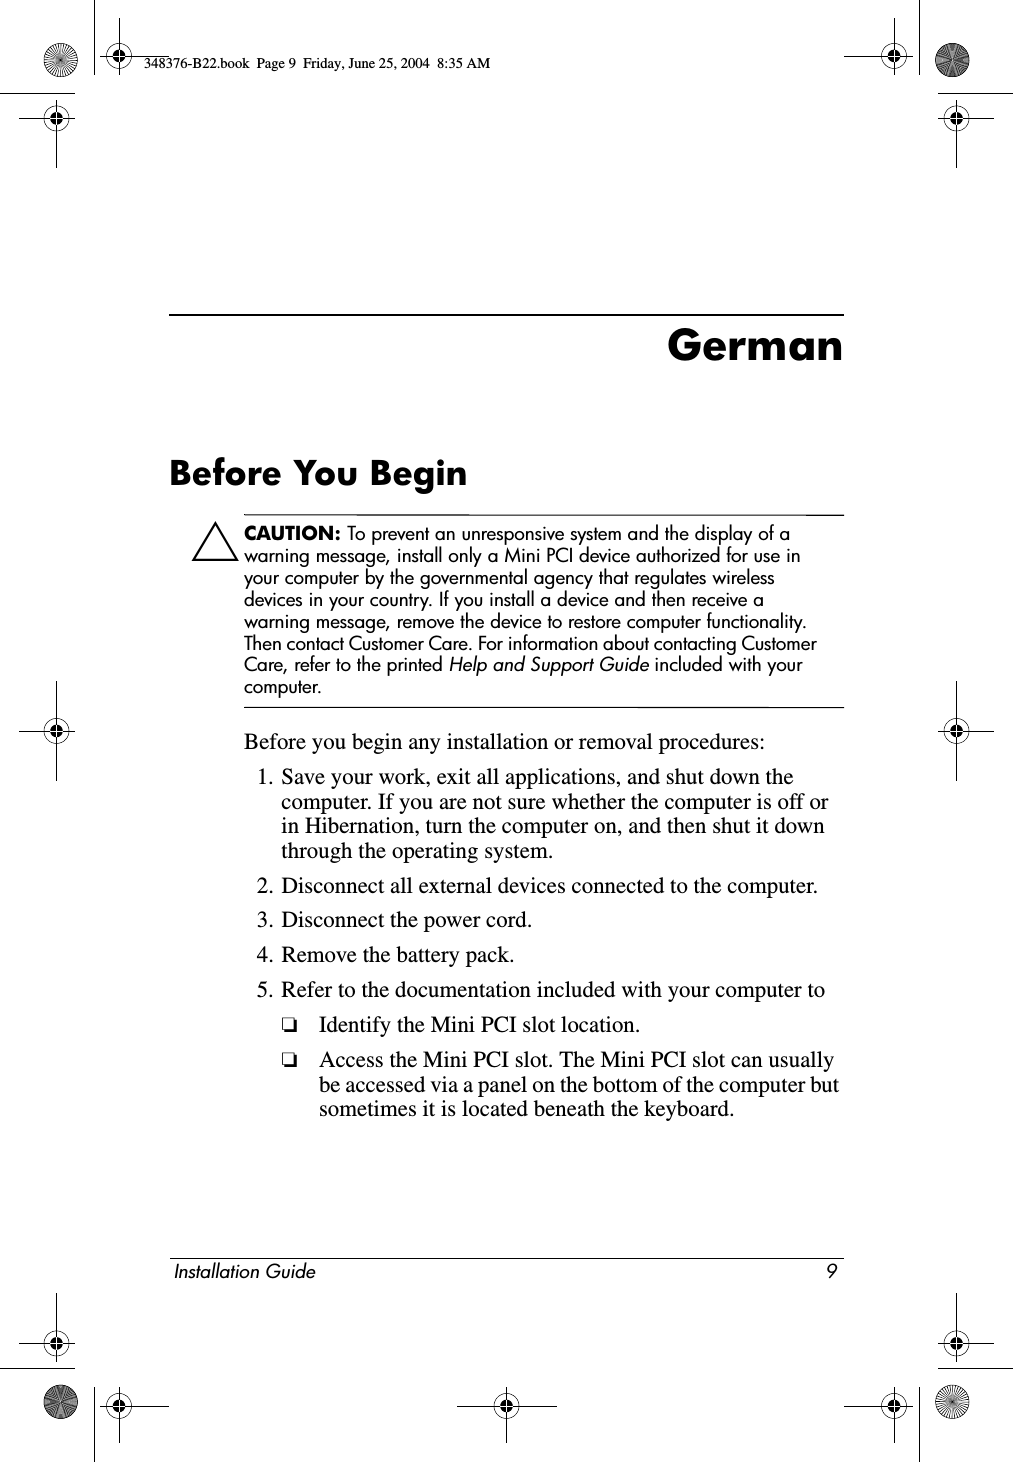 Installation Guide 9GermanBefore You BeginÄCAUTION: To prevent an unresponsive system and the display of a warning message, install only a Mini PCI device authorized for use in your computer by the governmental agency that regulates wireless devices in your country. If you install a device and then receive a warning message, remove the device to restore computer functionality. Then contact Customer Care. For information about contacting Customer Care, refer to the printed Help and Support Guide included with your computer.Before you begin any installation or removal procedures:1. Save your work, exit all applications, and shut down the computer. If you are not sure whether the computer is off or in Hibernation, turn the computer on, and then shut it down through the operating system.2. Disconnect all external devices connected to the computer.3. Disconnect the power cord.4. Remove the battery pack.5. Refer to the documentation included with your computer to❏Identify the Mini PCI slot location.❏Access the Mini PCI slot. The Mini PCI slot can usually be accessed via a panel on the bottom of the computer but sometimes it is located beneath the keyboard.348376-B22.book  Page 9  Friday, June 25, 2004  8:35 AM